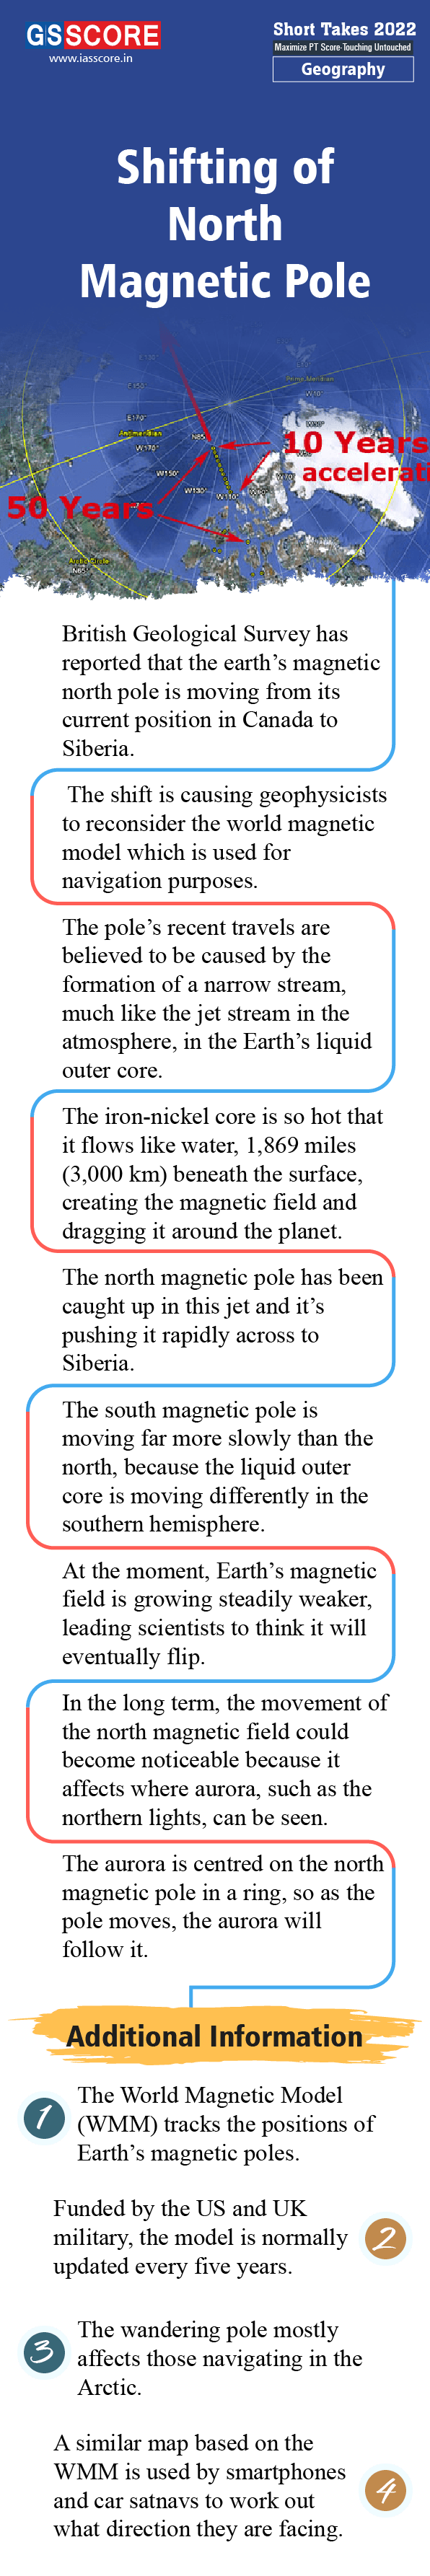 Shifting of North Magnetic Pole